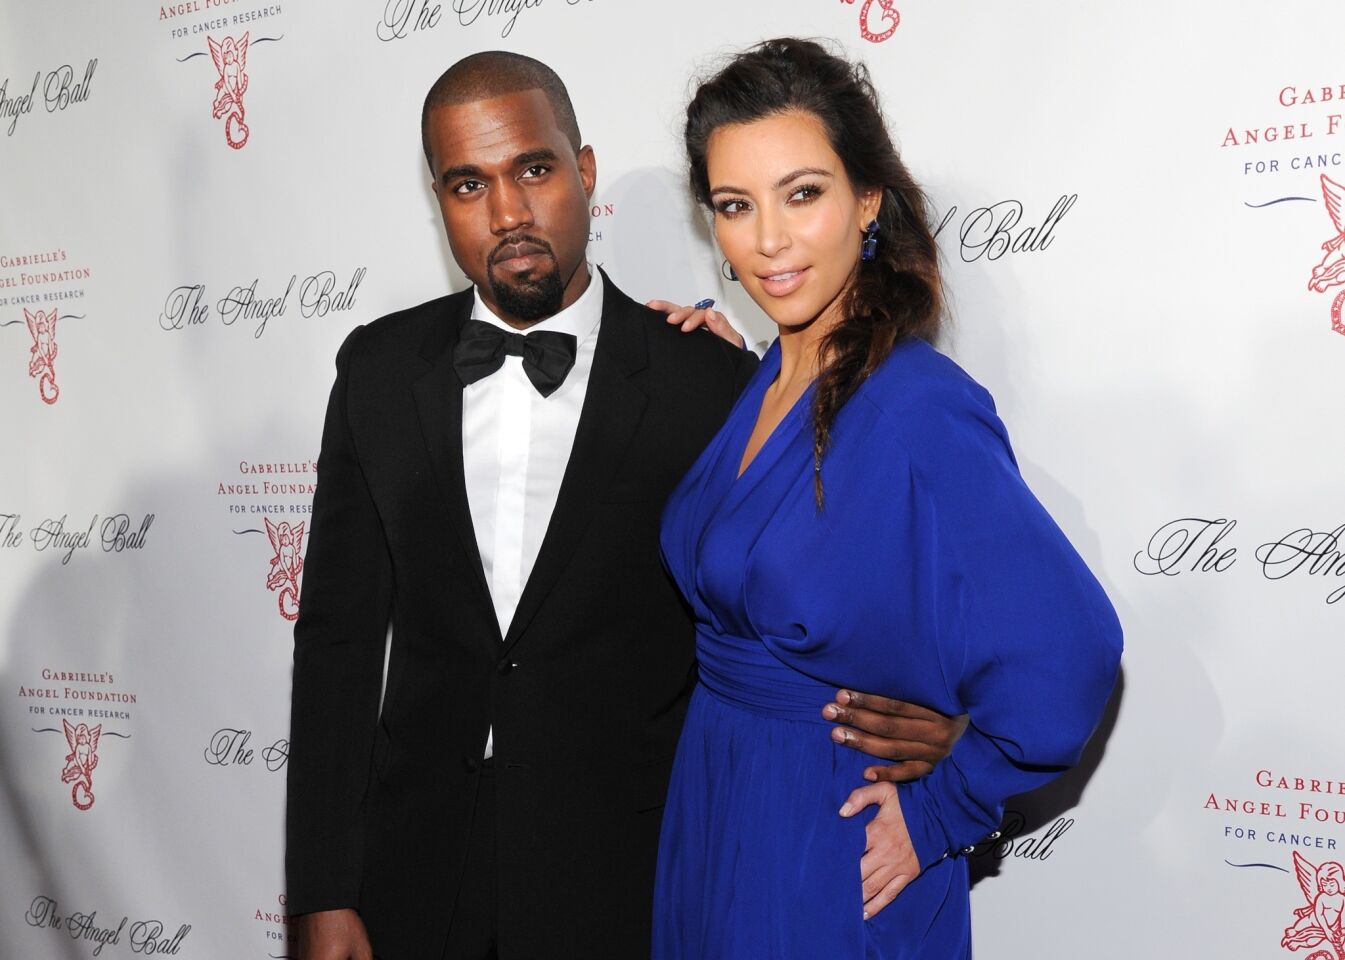 Singer Kanye West and girlfriend Kim Kardashian attend a benefit in New York.